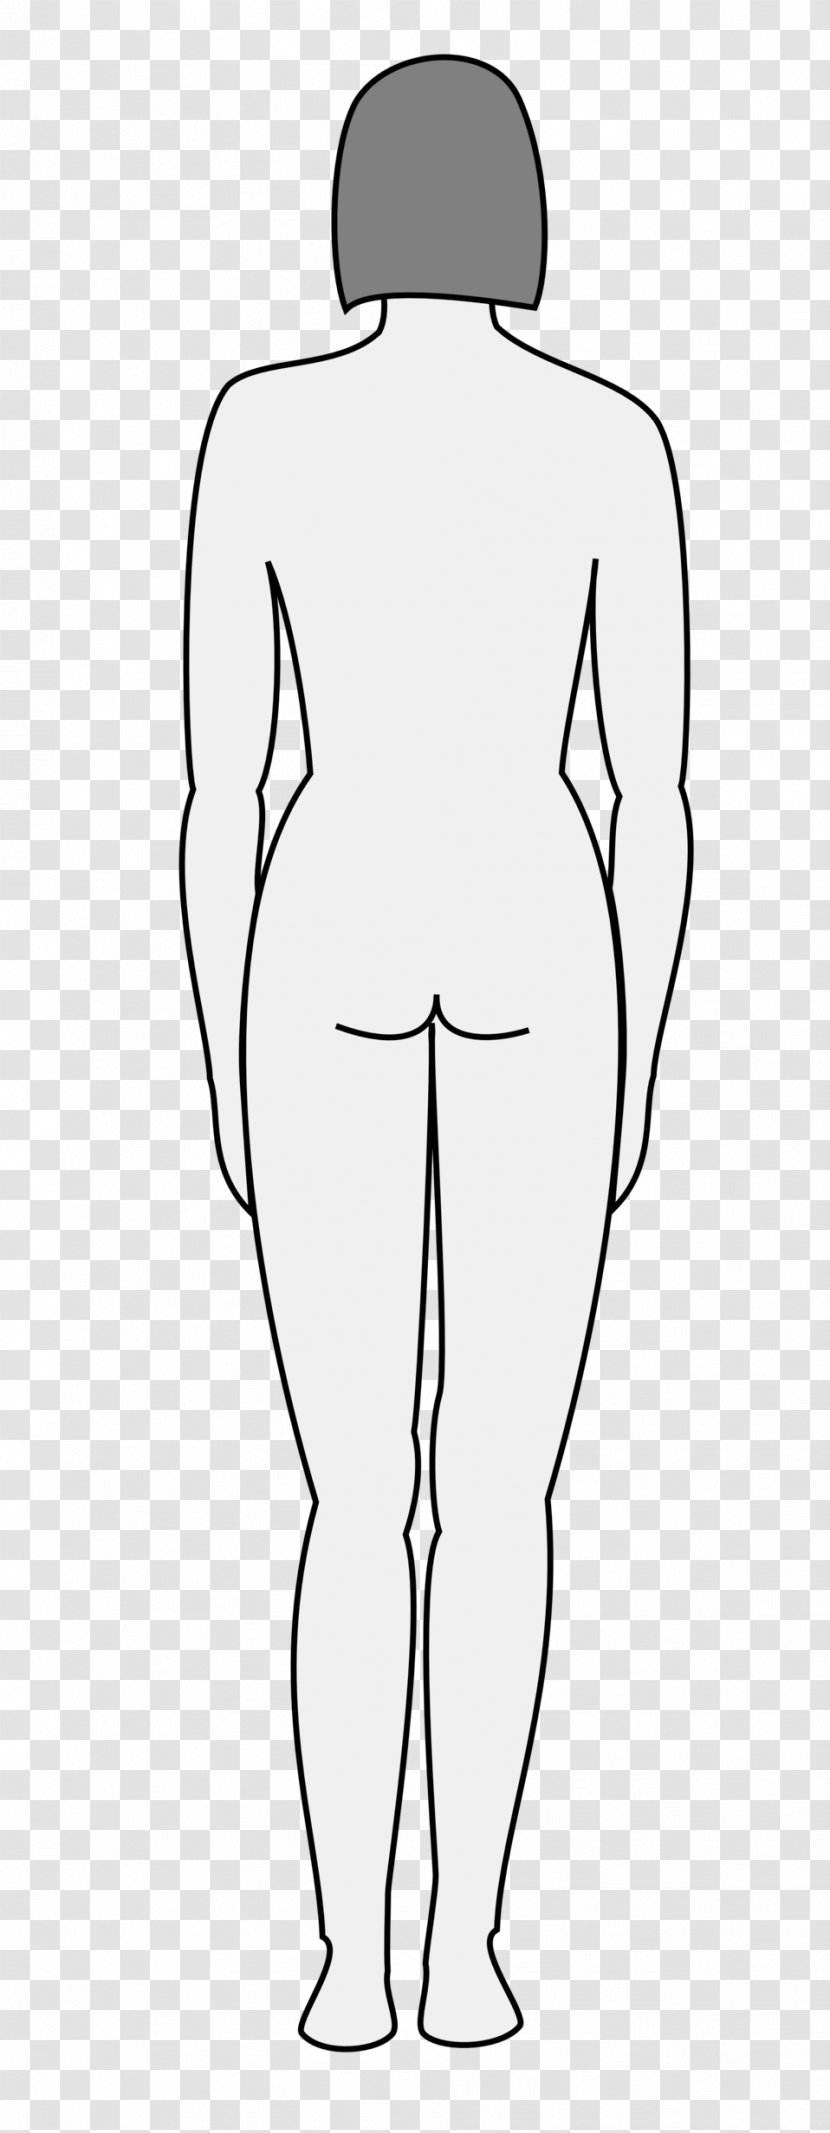 Female Woman Human Body Silhouette Transparent PNG